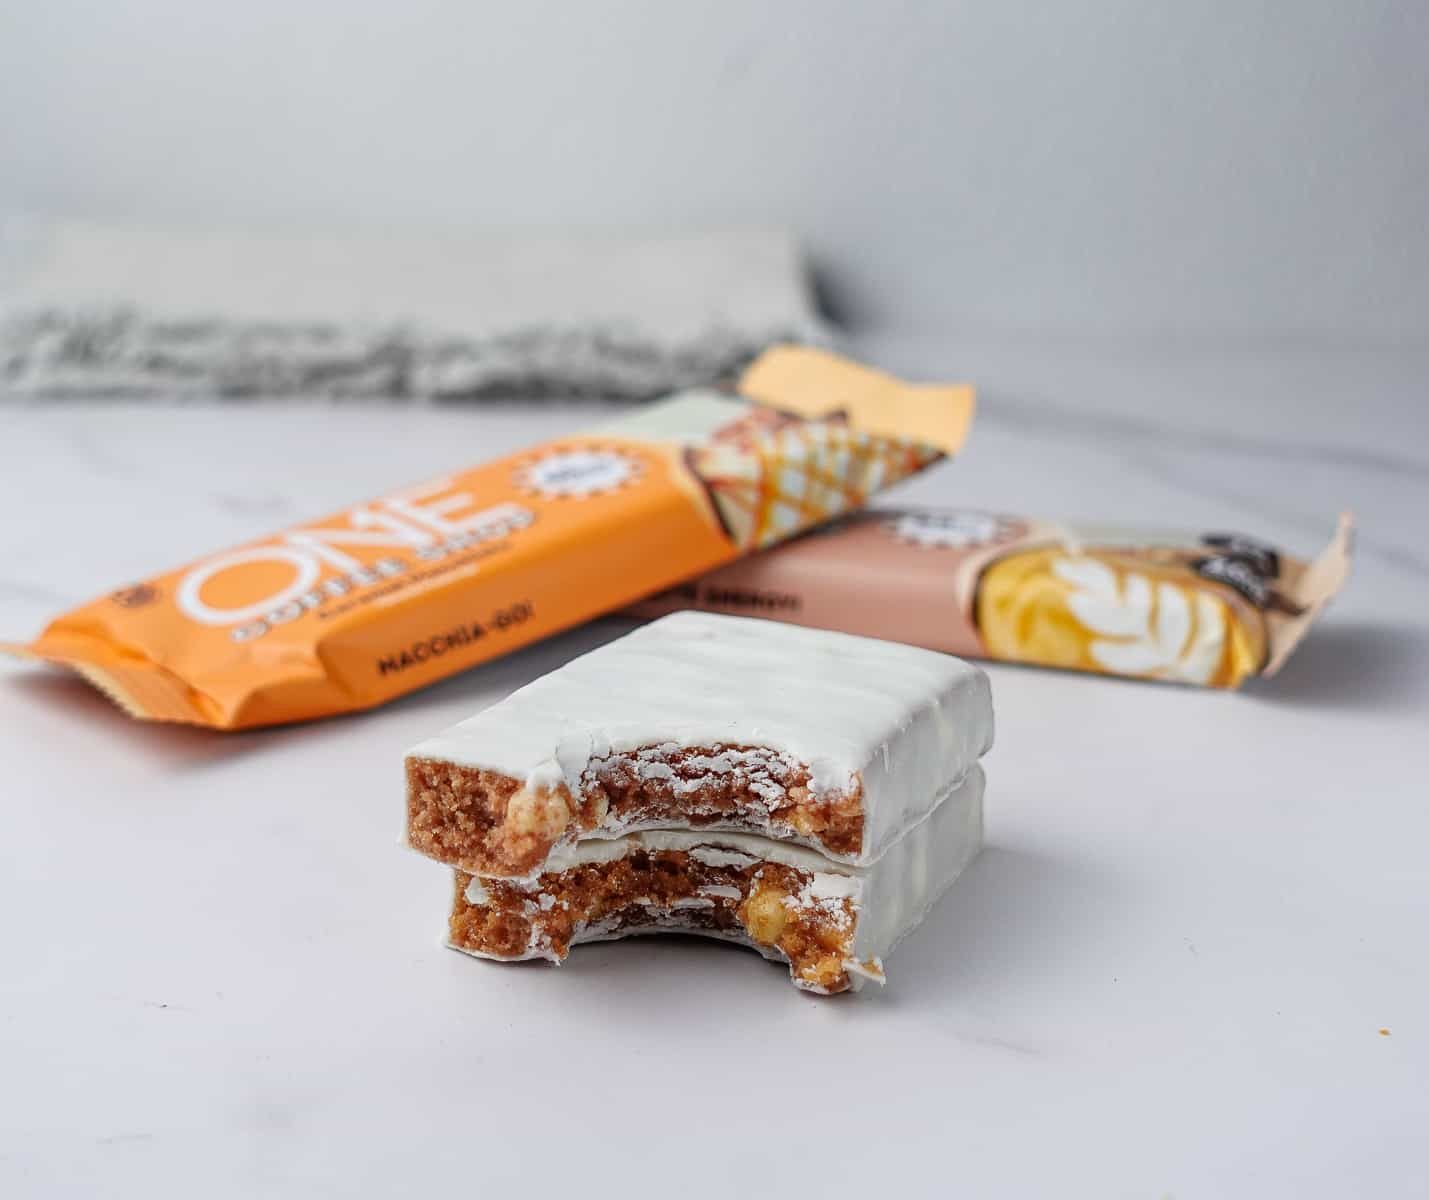 11-oh-yeah-one-protein-bars-nutrition-facts